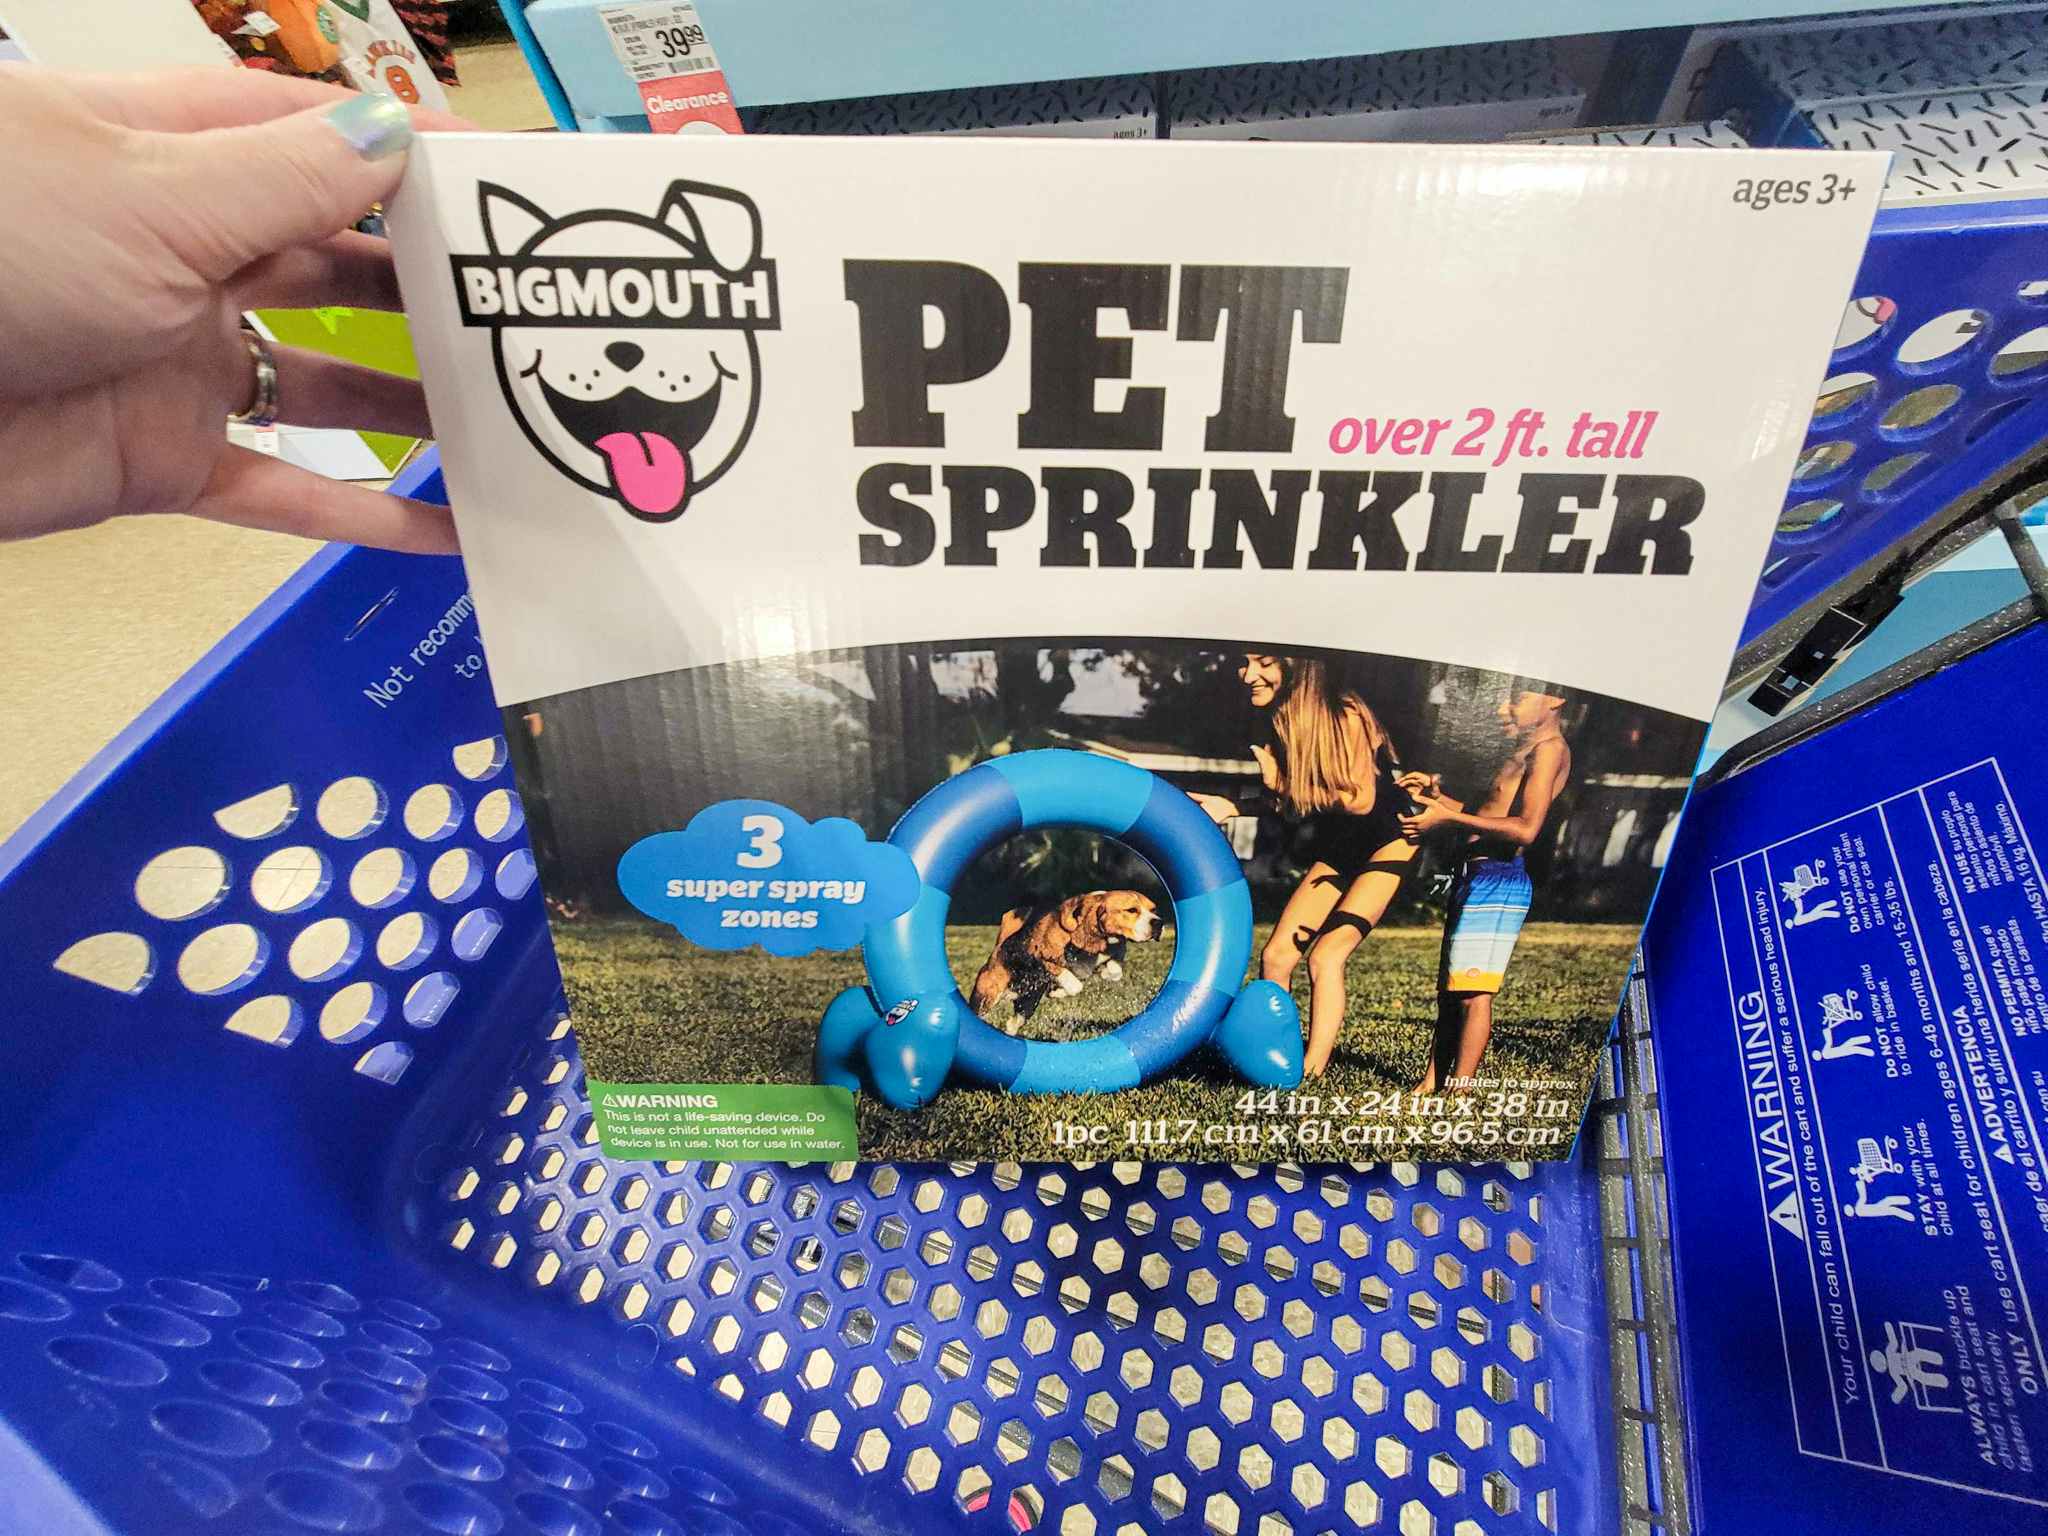 a 2 foot tall pet sprinkler in a cart